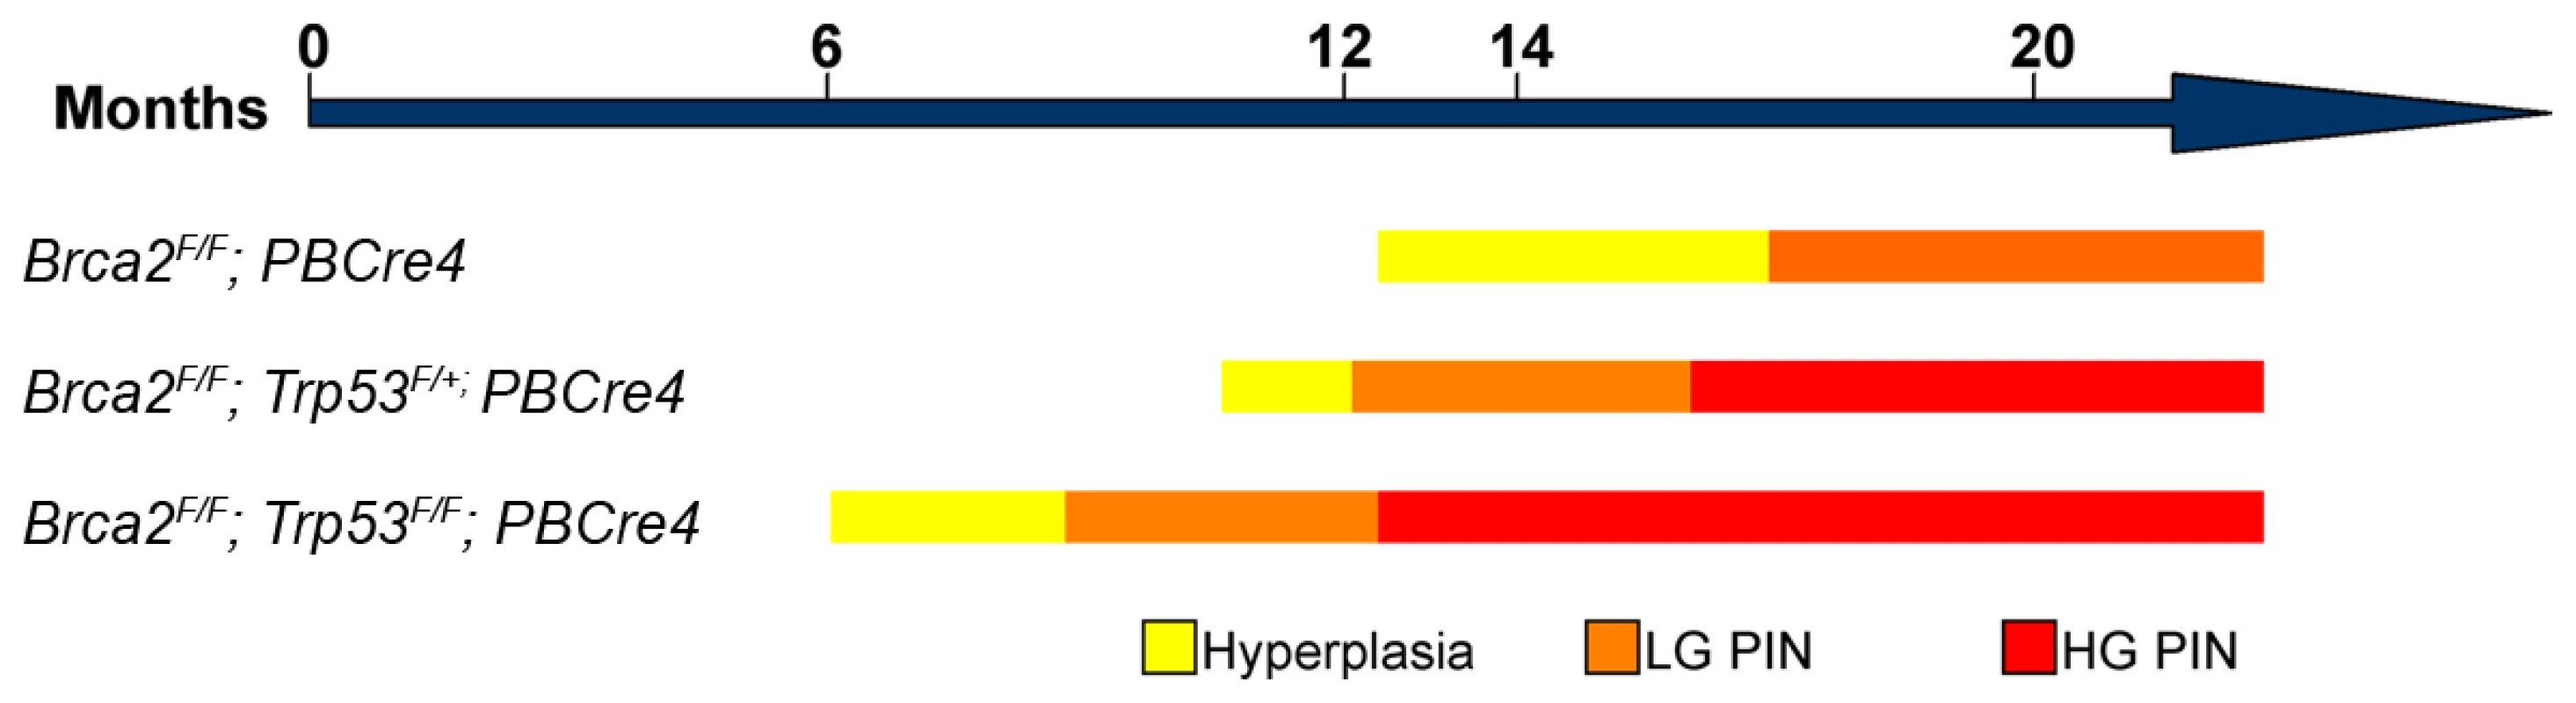 Schematic showing the progression of prostate neoplasia in <i>Brca2</i> and <i>Brca2;Trp53</i> mutant animals.